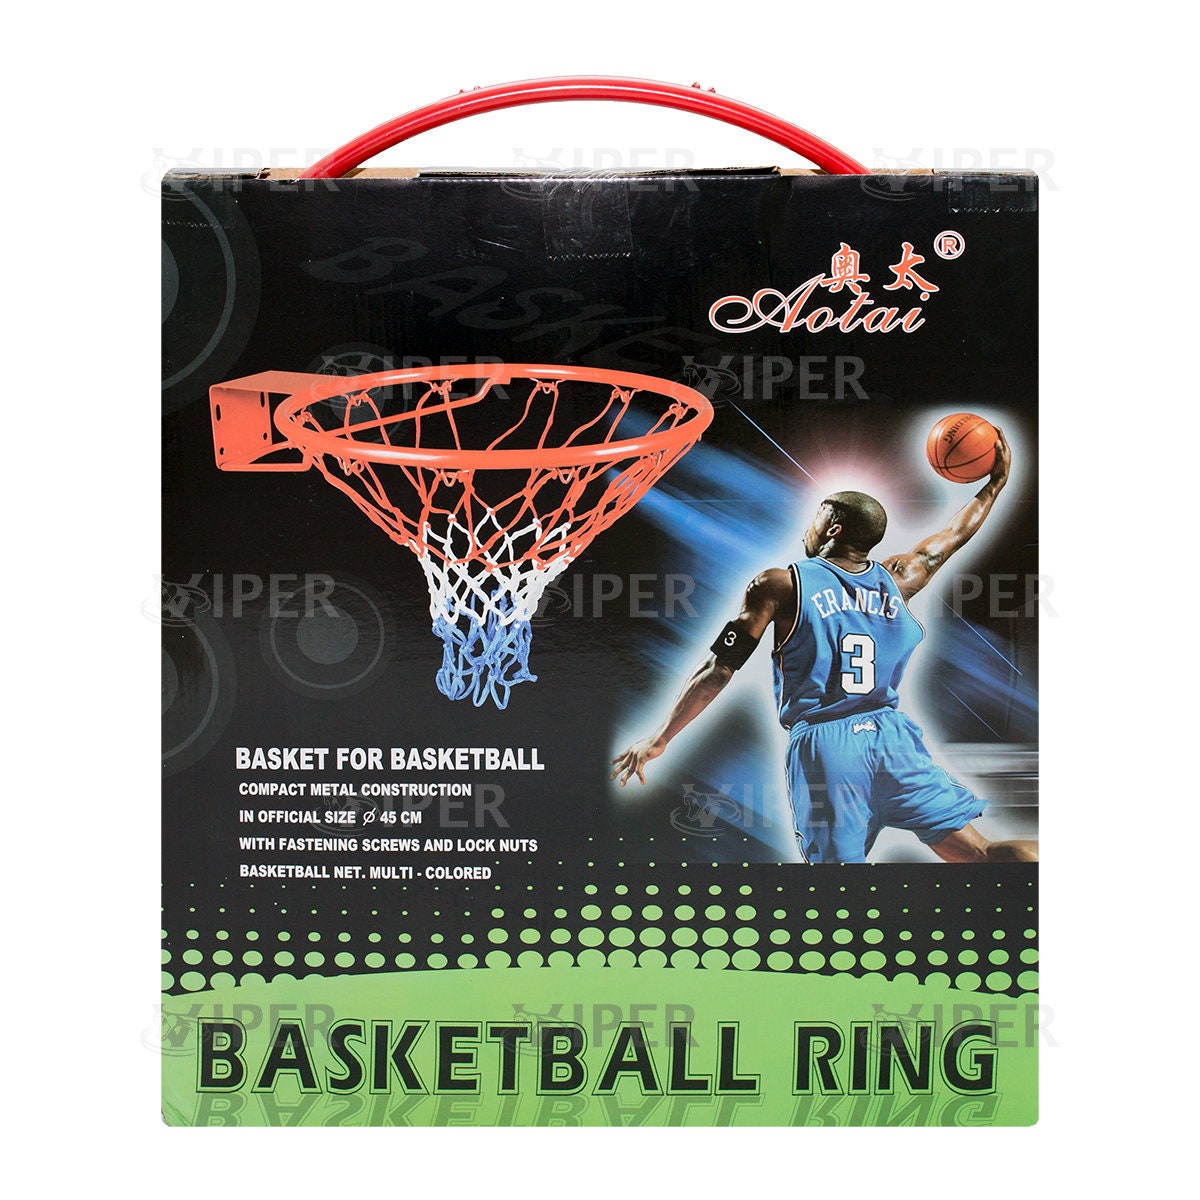 GRIFFIN Basket Ball NET with Ring and Basketball Size 3 for Home Use :  Amazon.in: Home & Kitchen